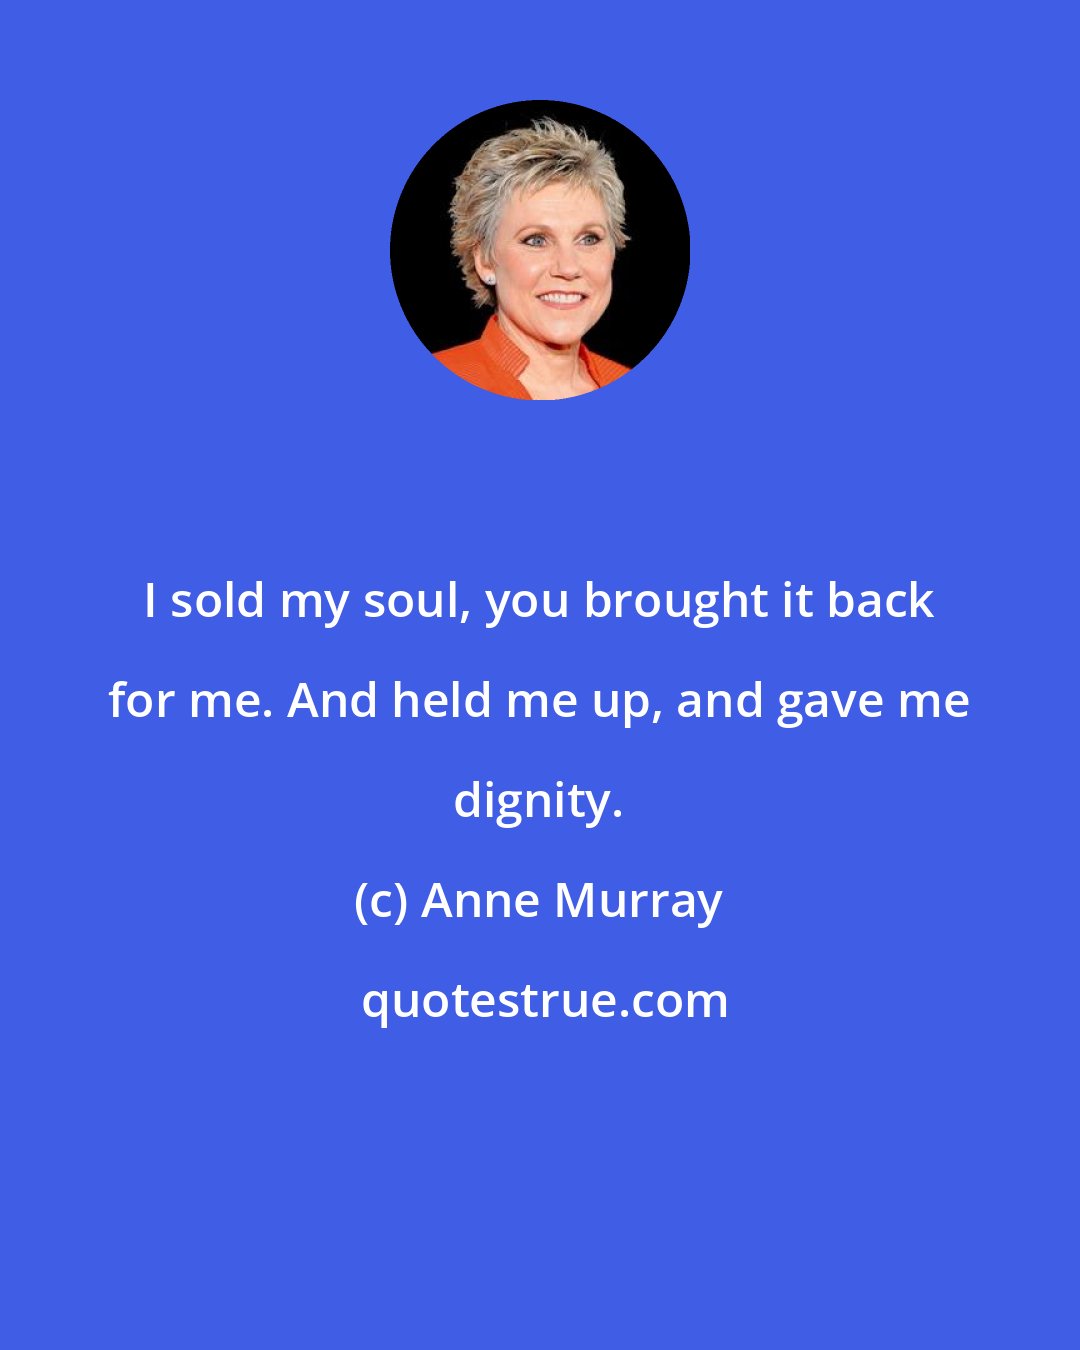 Anne Murray: I sold my soul, you brought it back for me. And held me up, and gave me dignity.